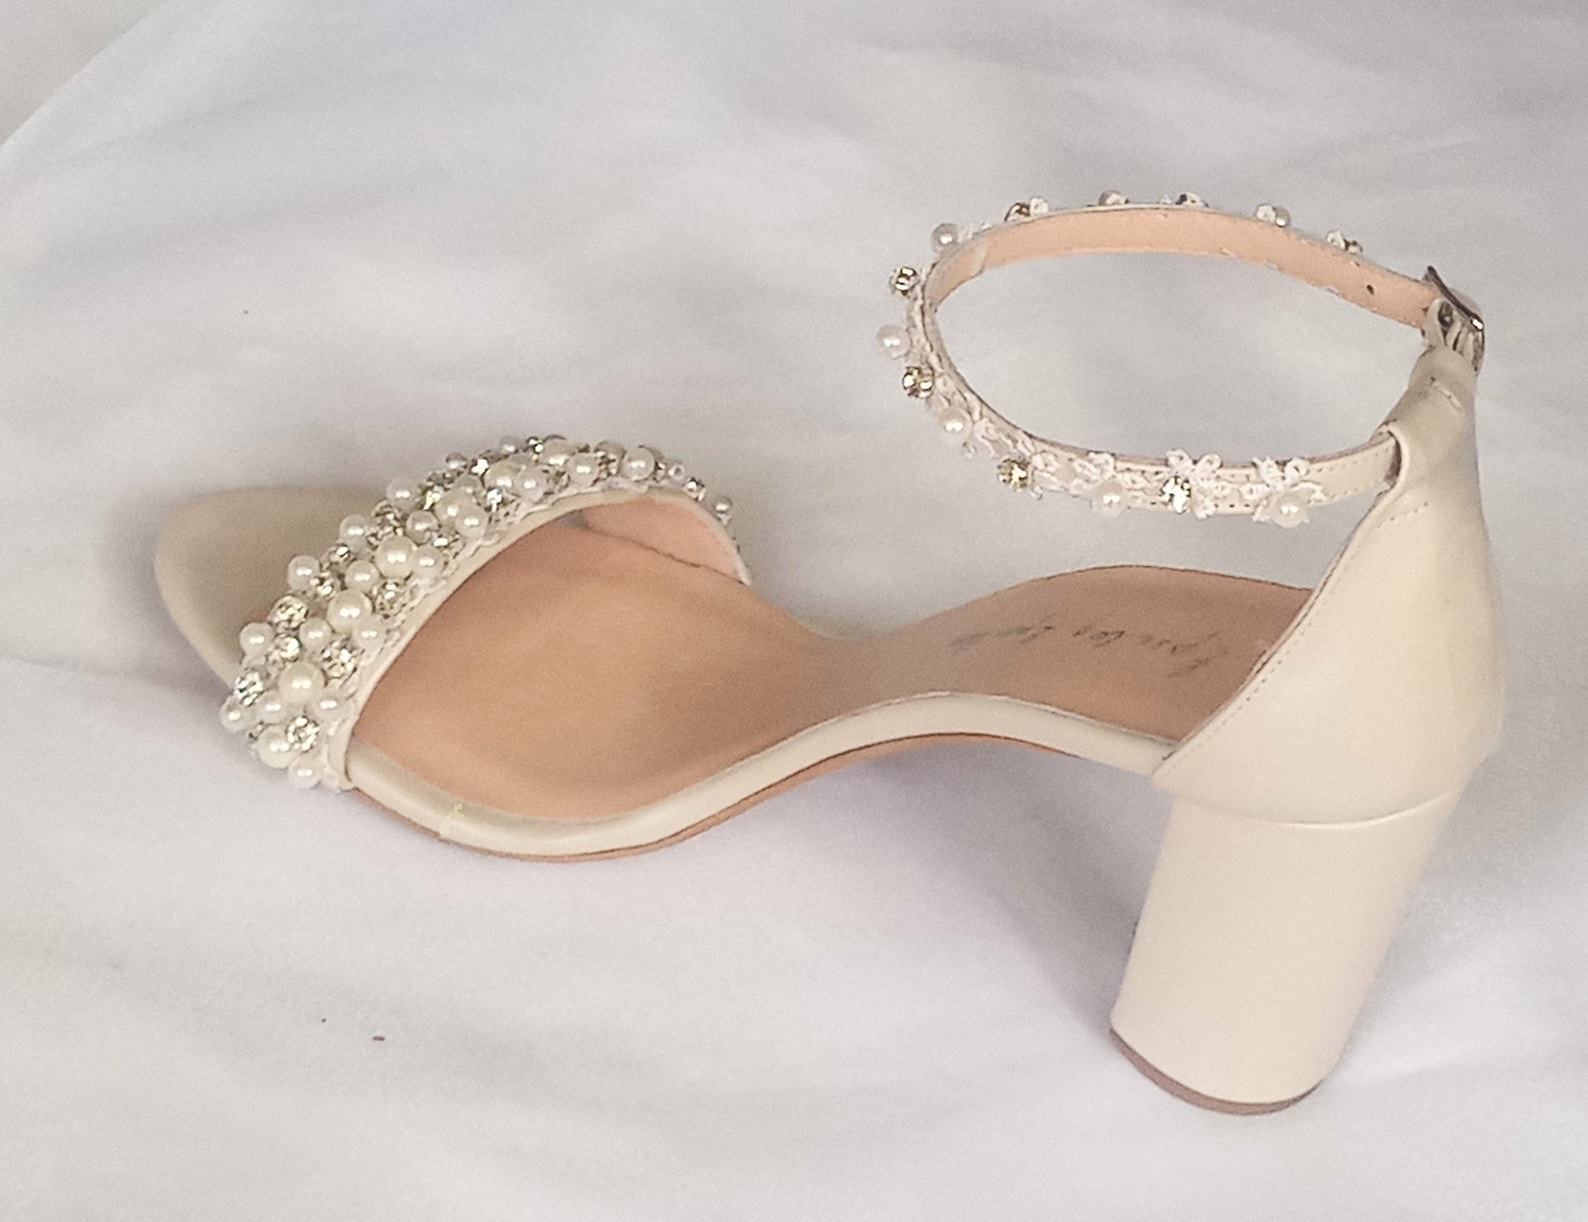 Ivory Pearl Wedding Shoes for Bride/ Bridal Shoes Block Heel/ | Etsy